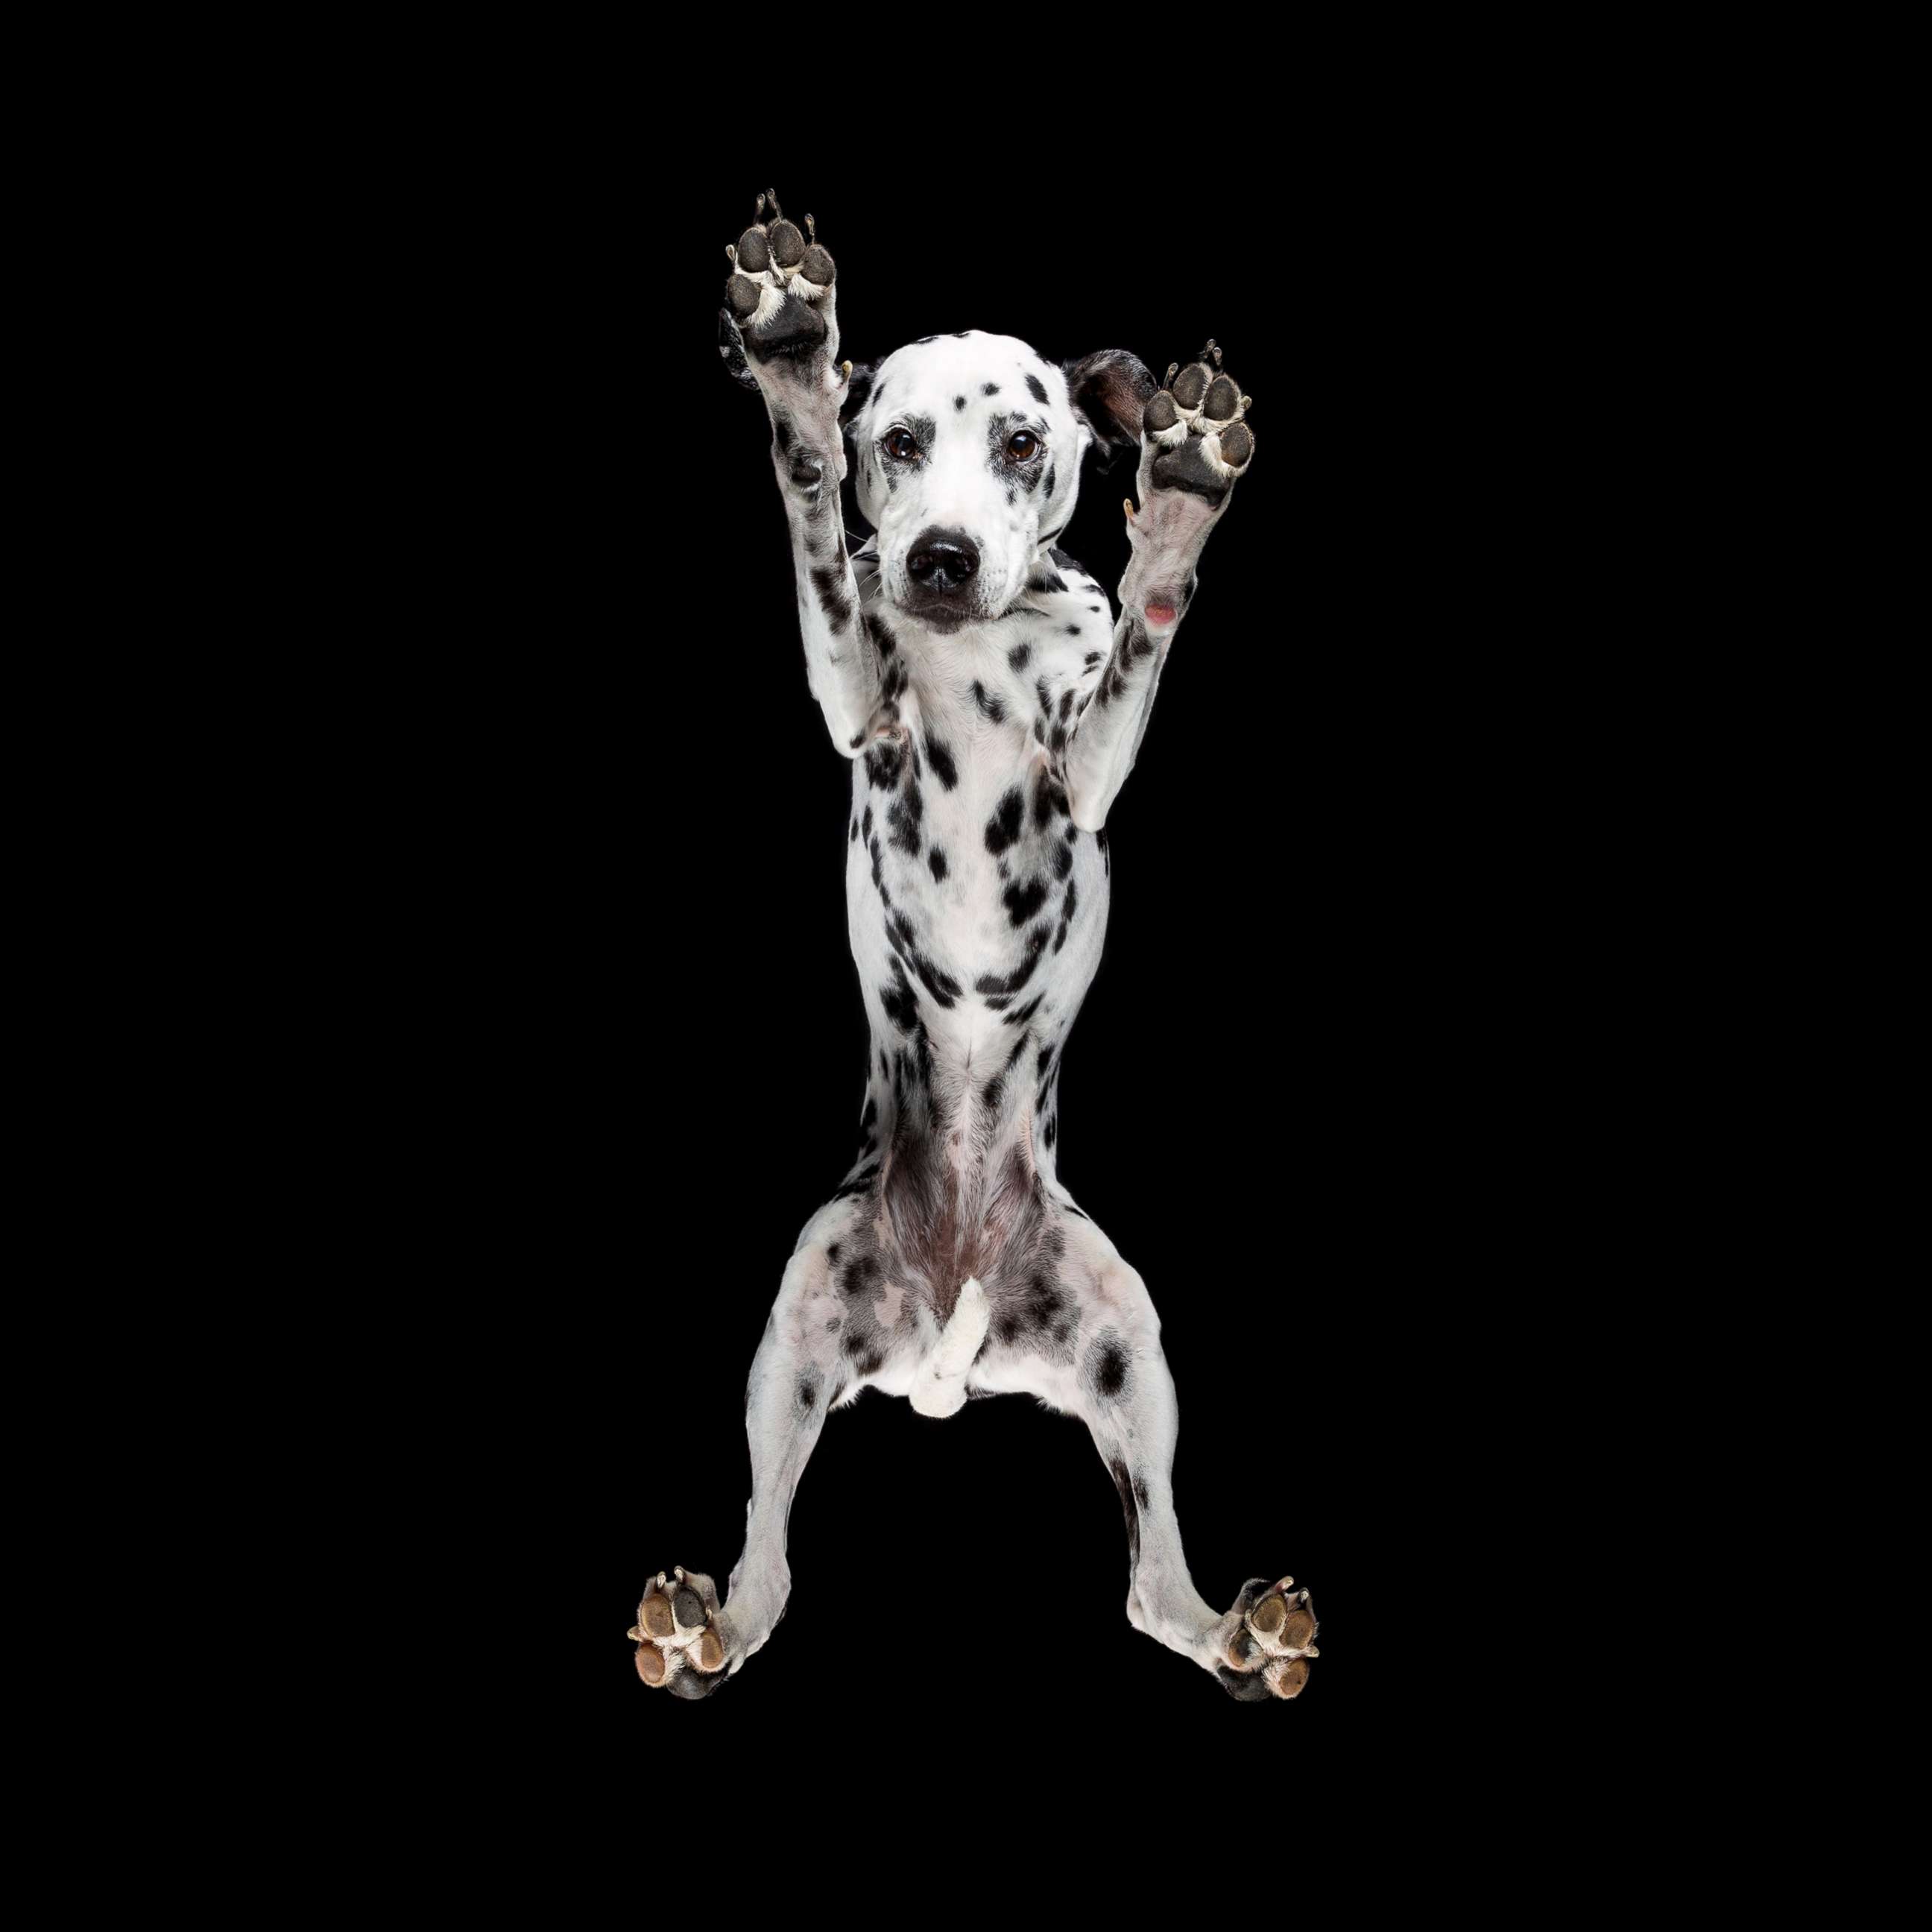 A dalmatian is captured in this photo from the series.